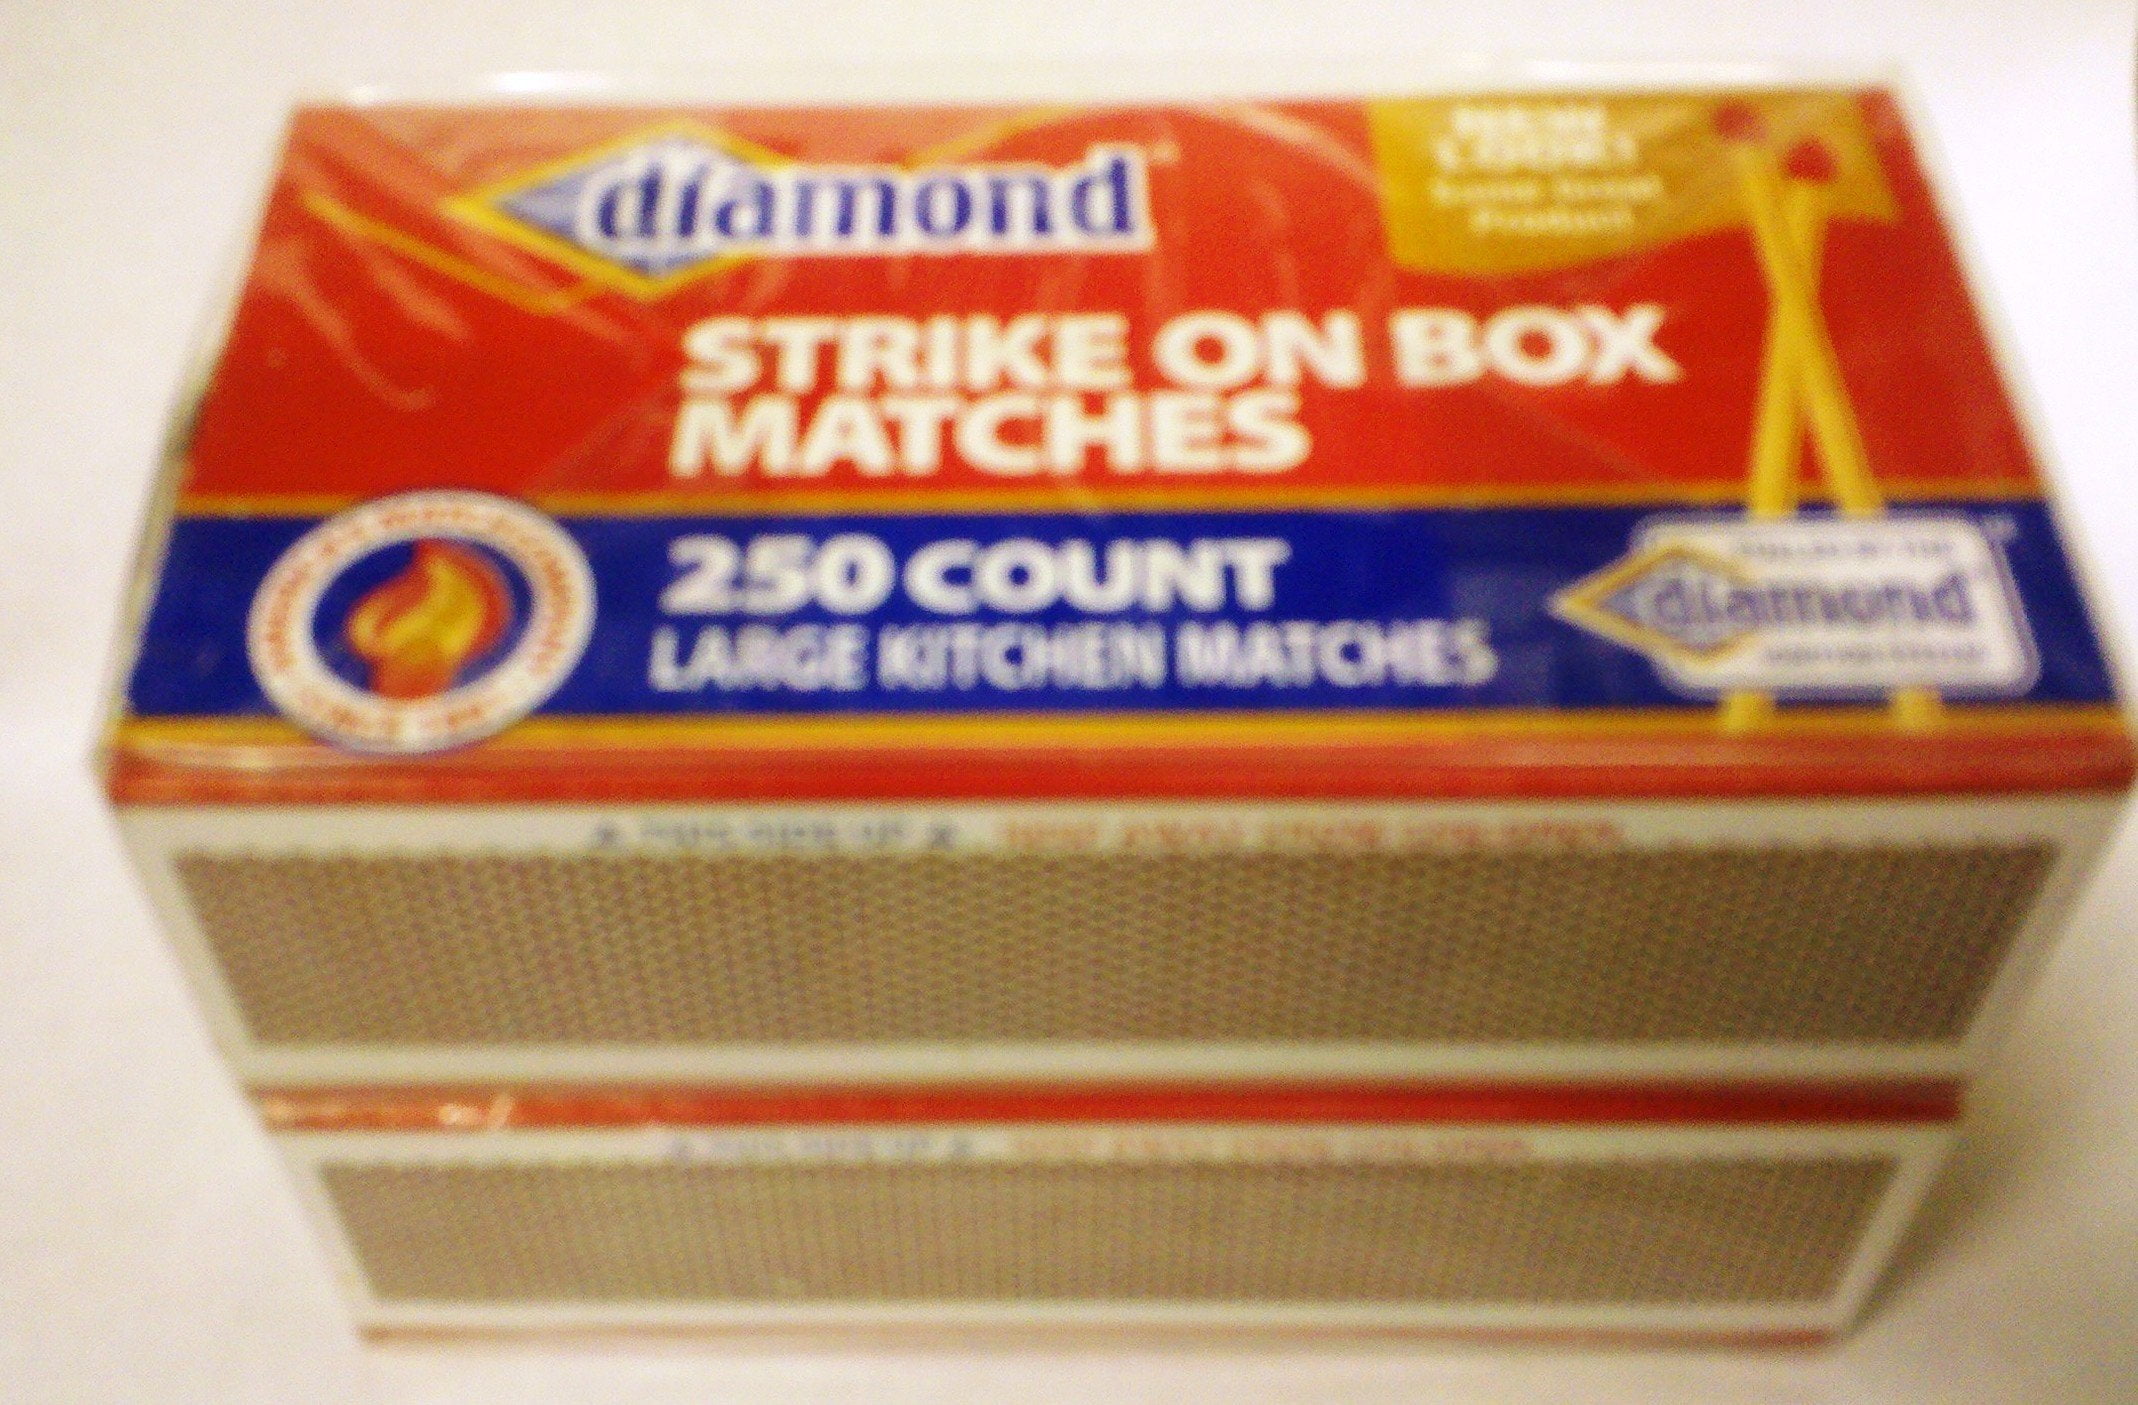 MegaDeal 10 Packs Matches 32 Count Strike on Box Kitchen Camping Fire Starter Lighter